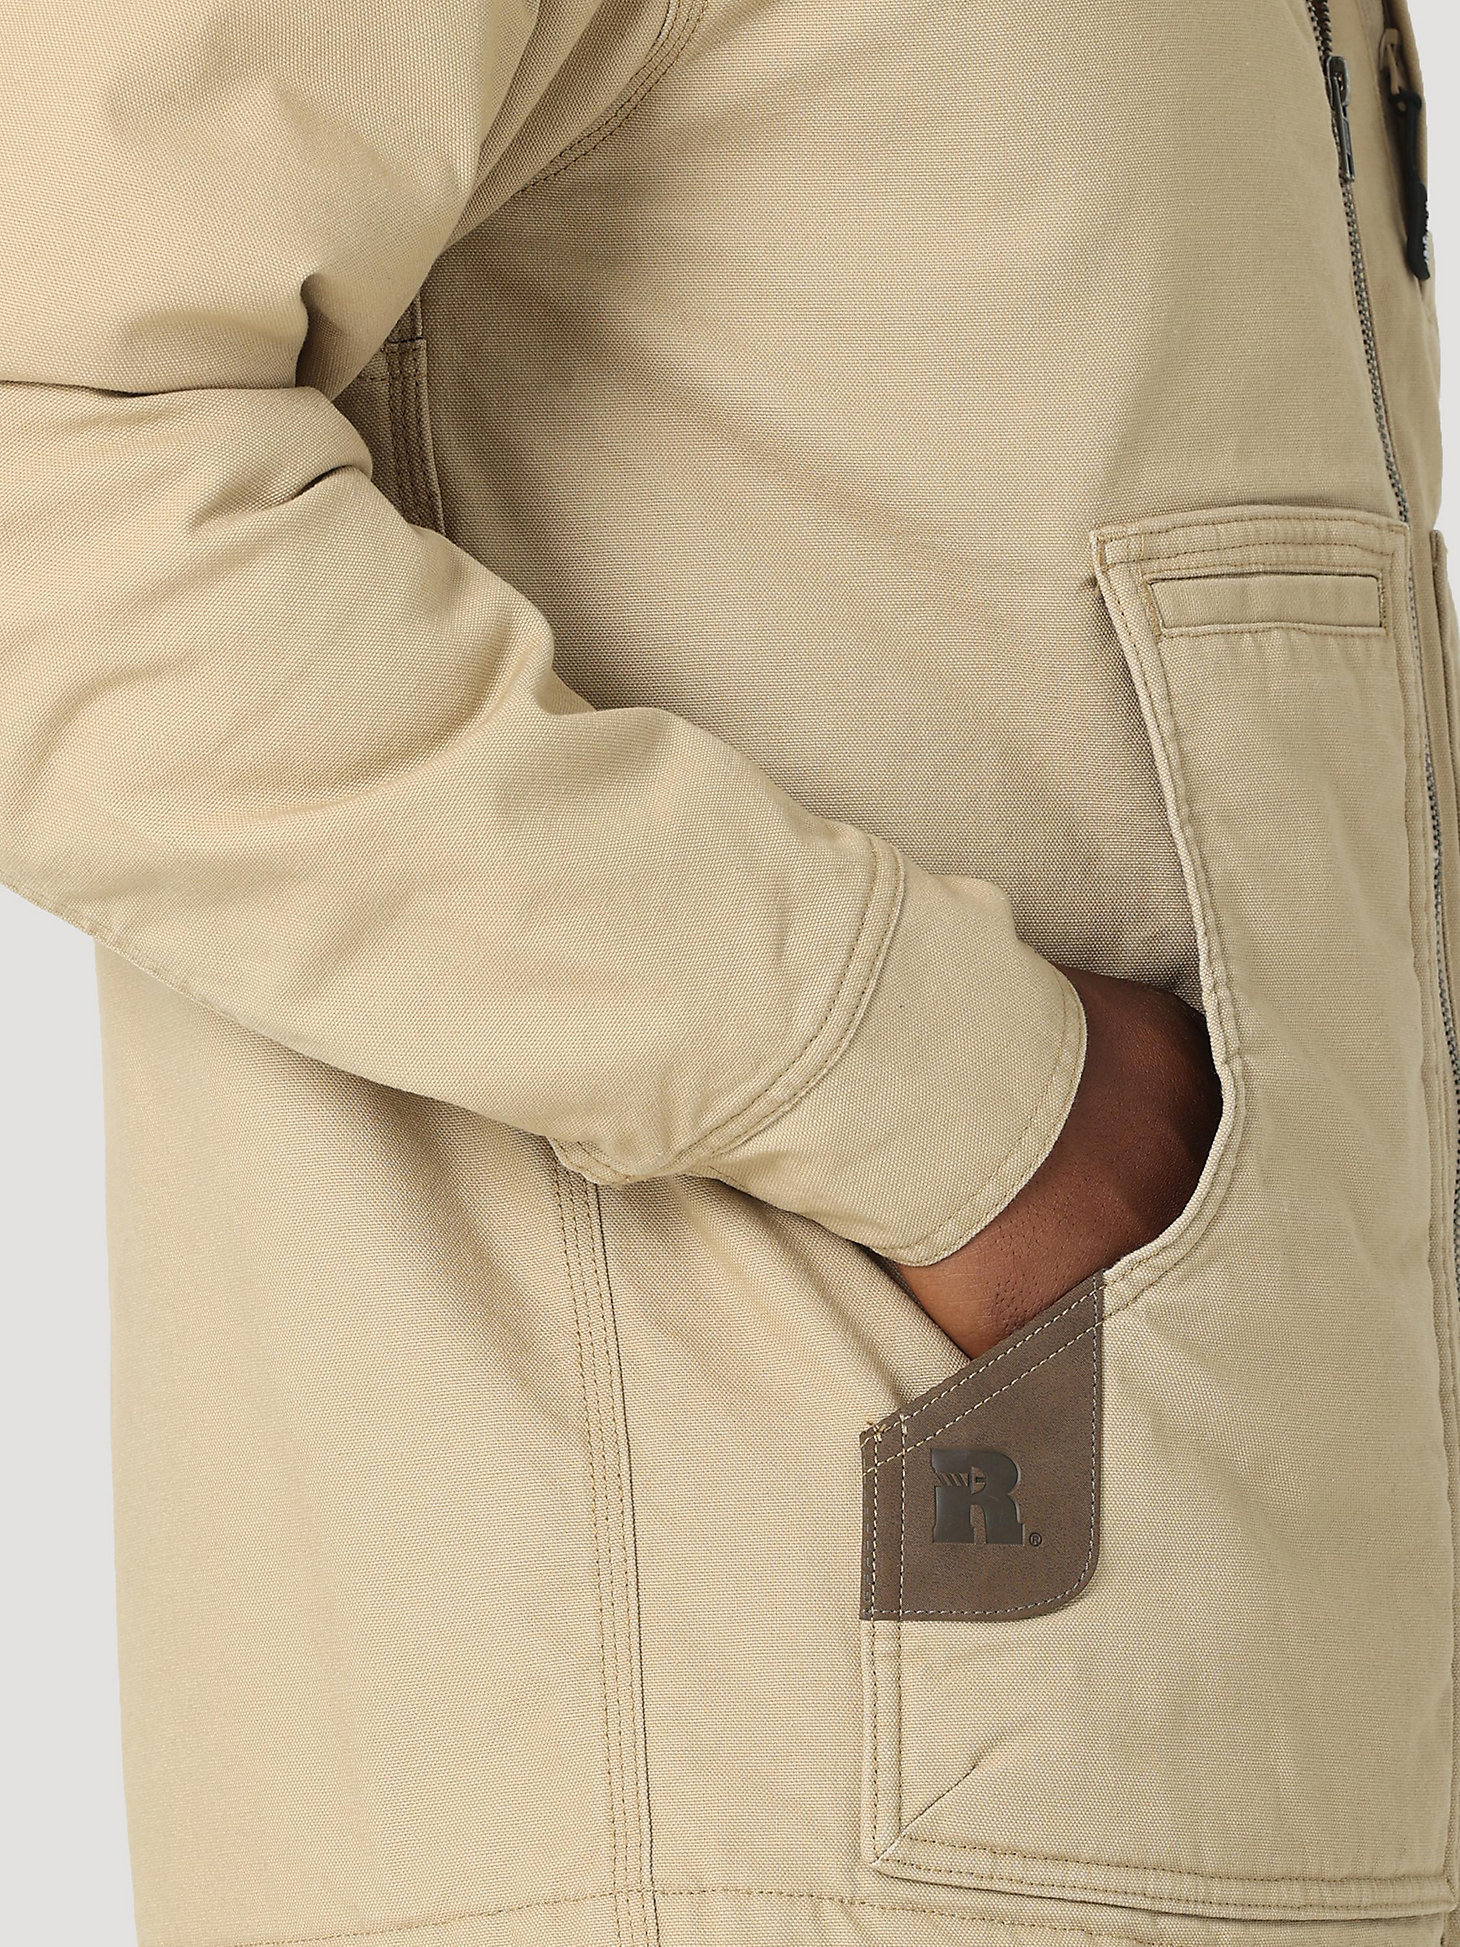 RIGGS Tough Layers Sherpa Lined Canvas Jacket in Golden Khaki alternative view 4